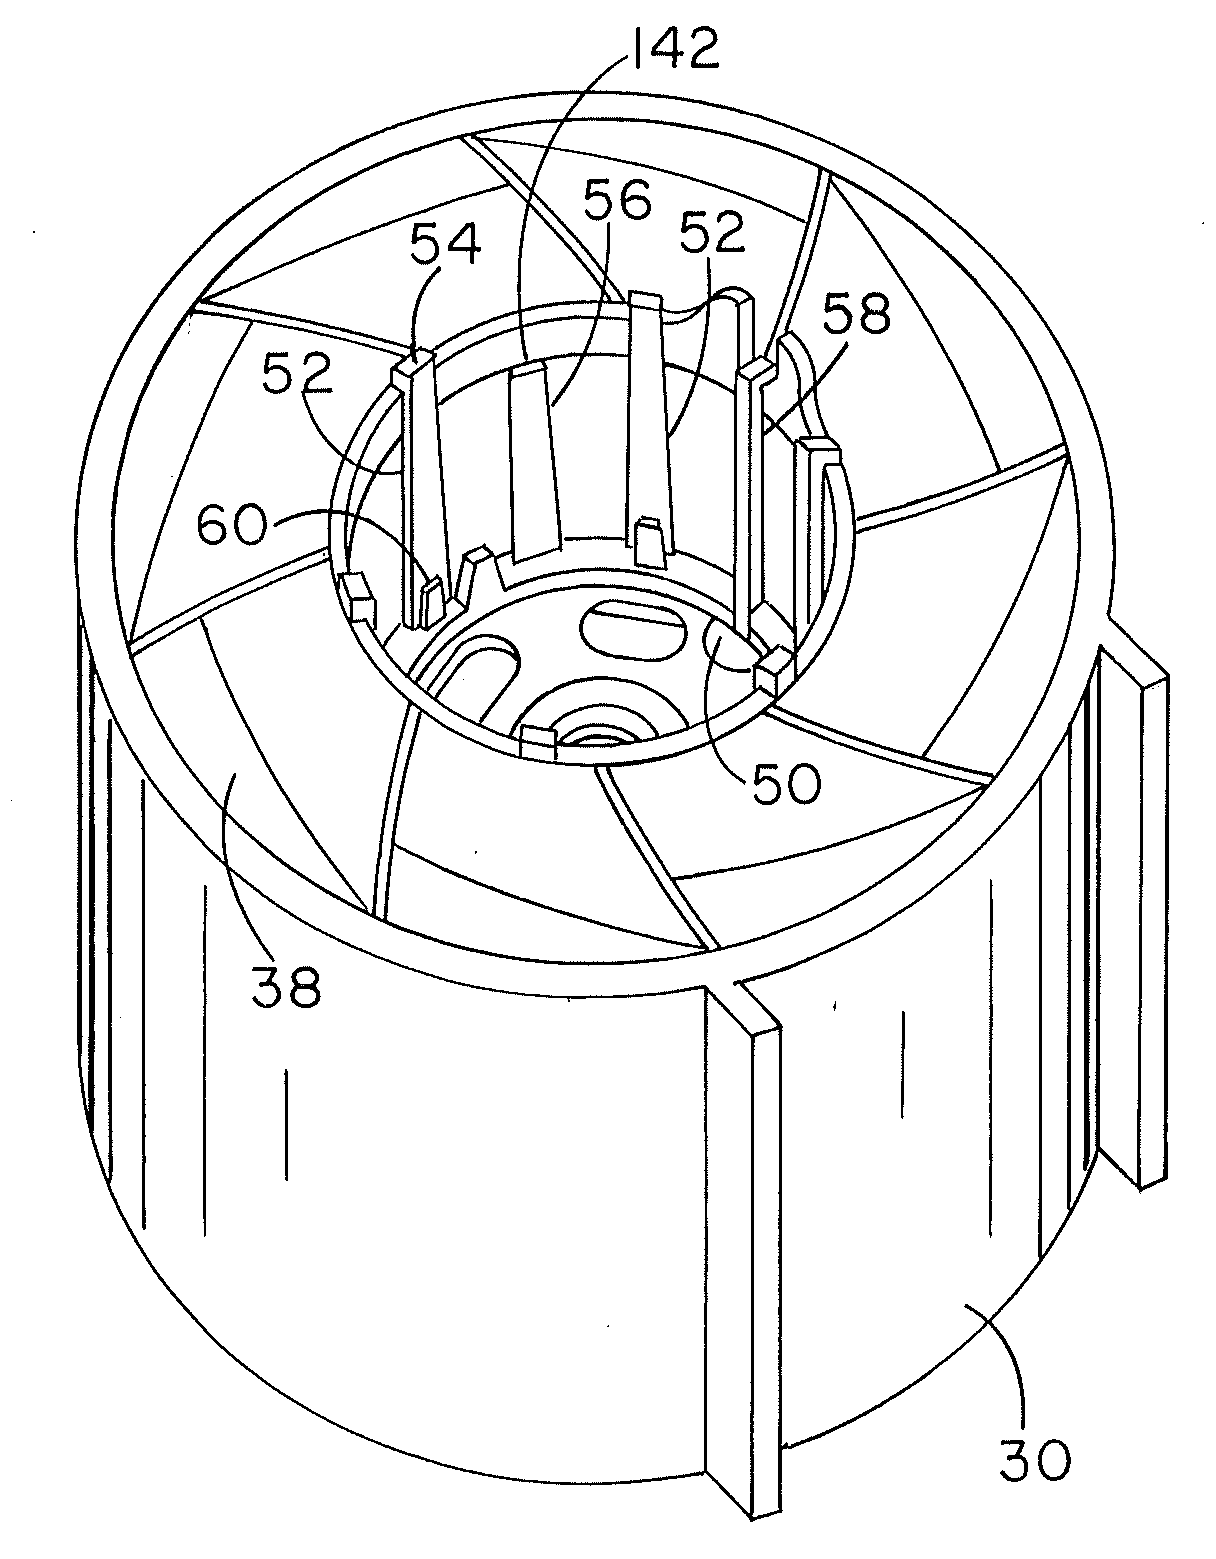 Device and Method for Mounting Electric Motor Stators